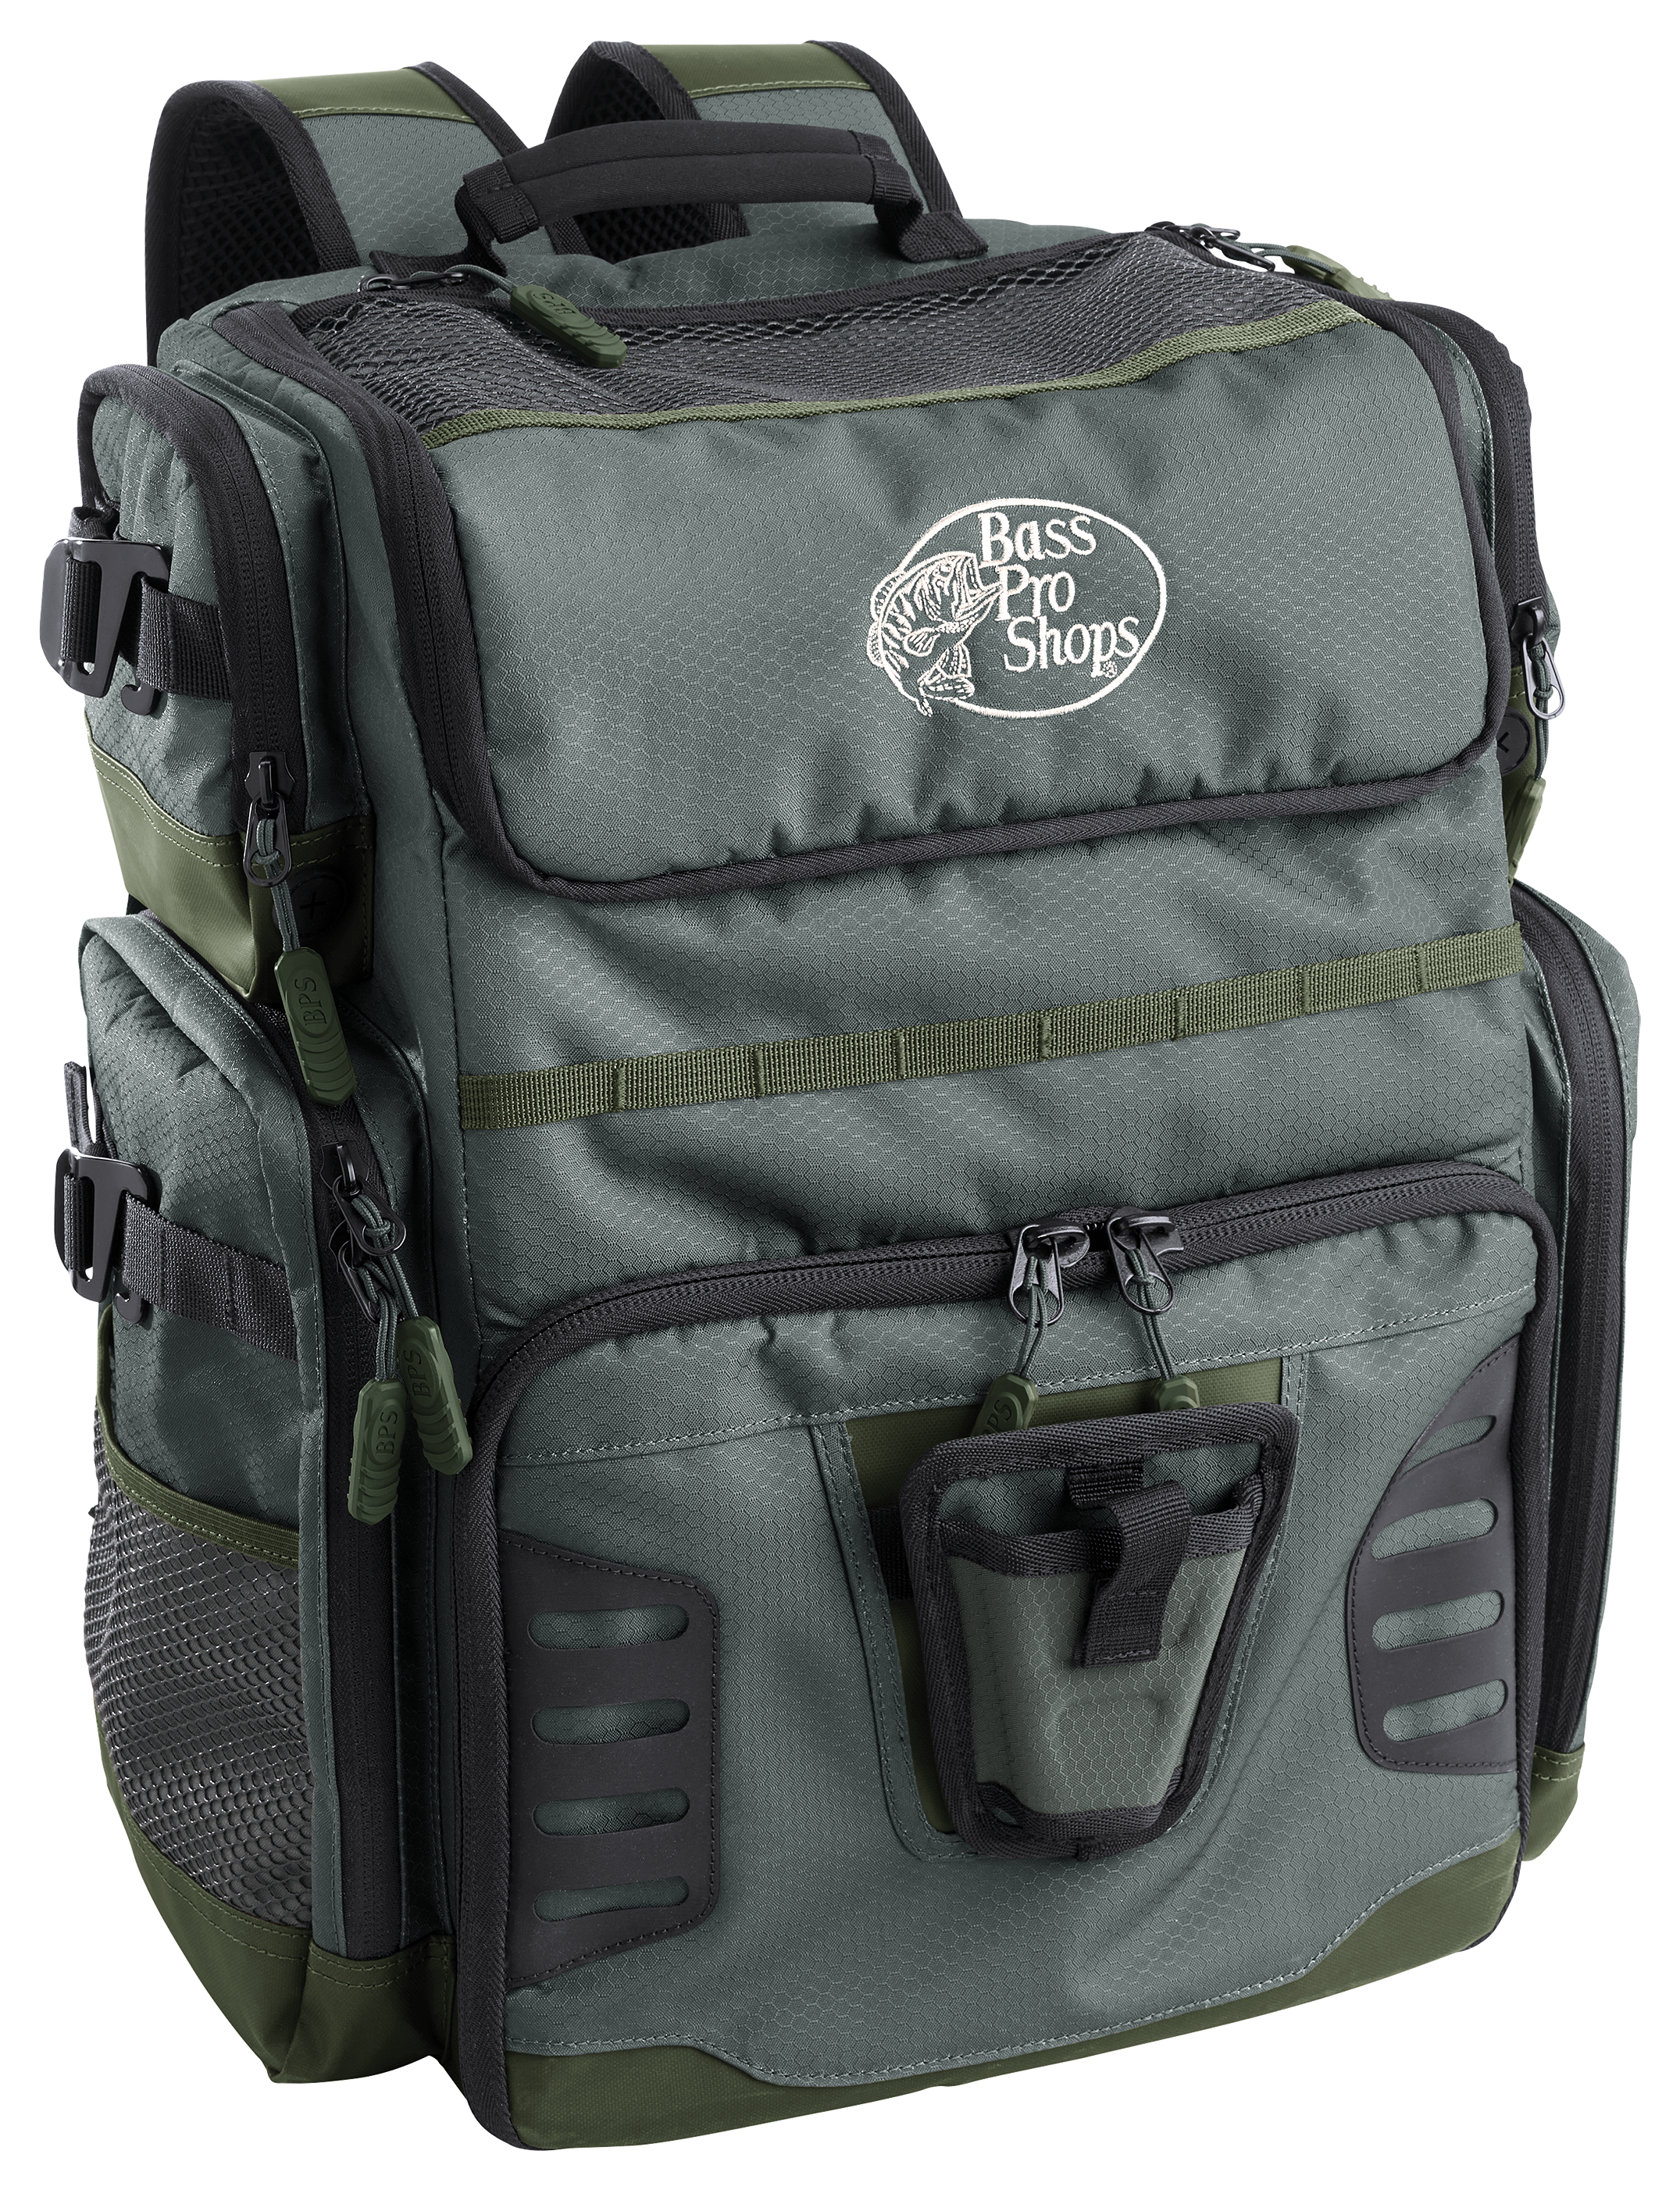 Bass Pro Shops Tackle Backpack 3600 for Kids - Blue Camo